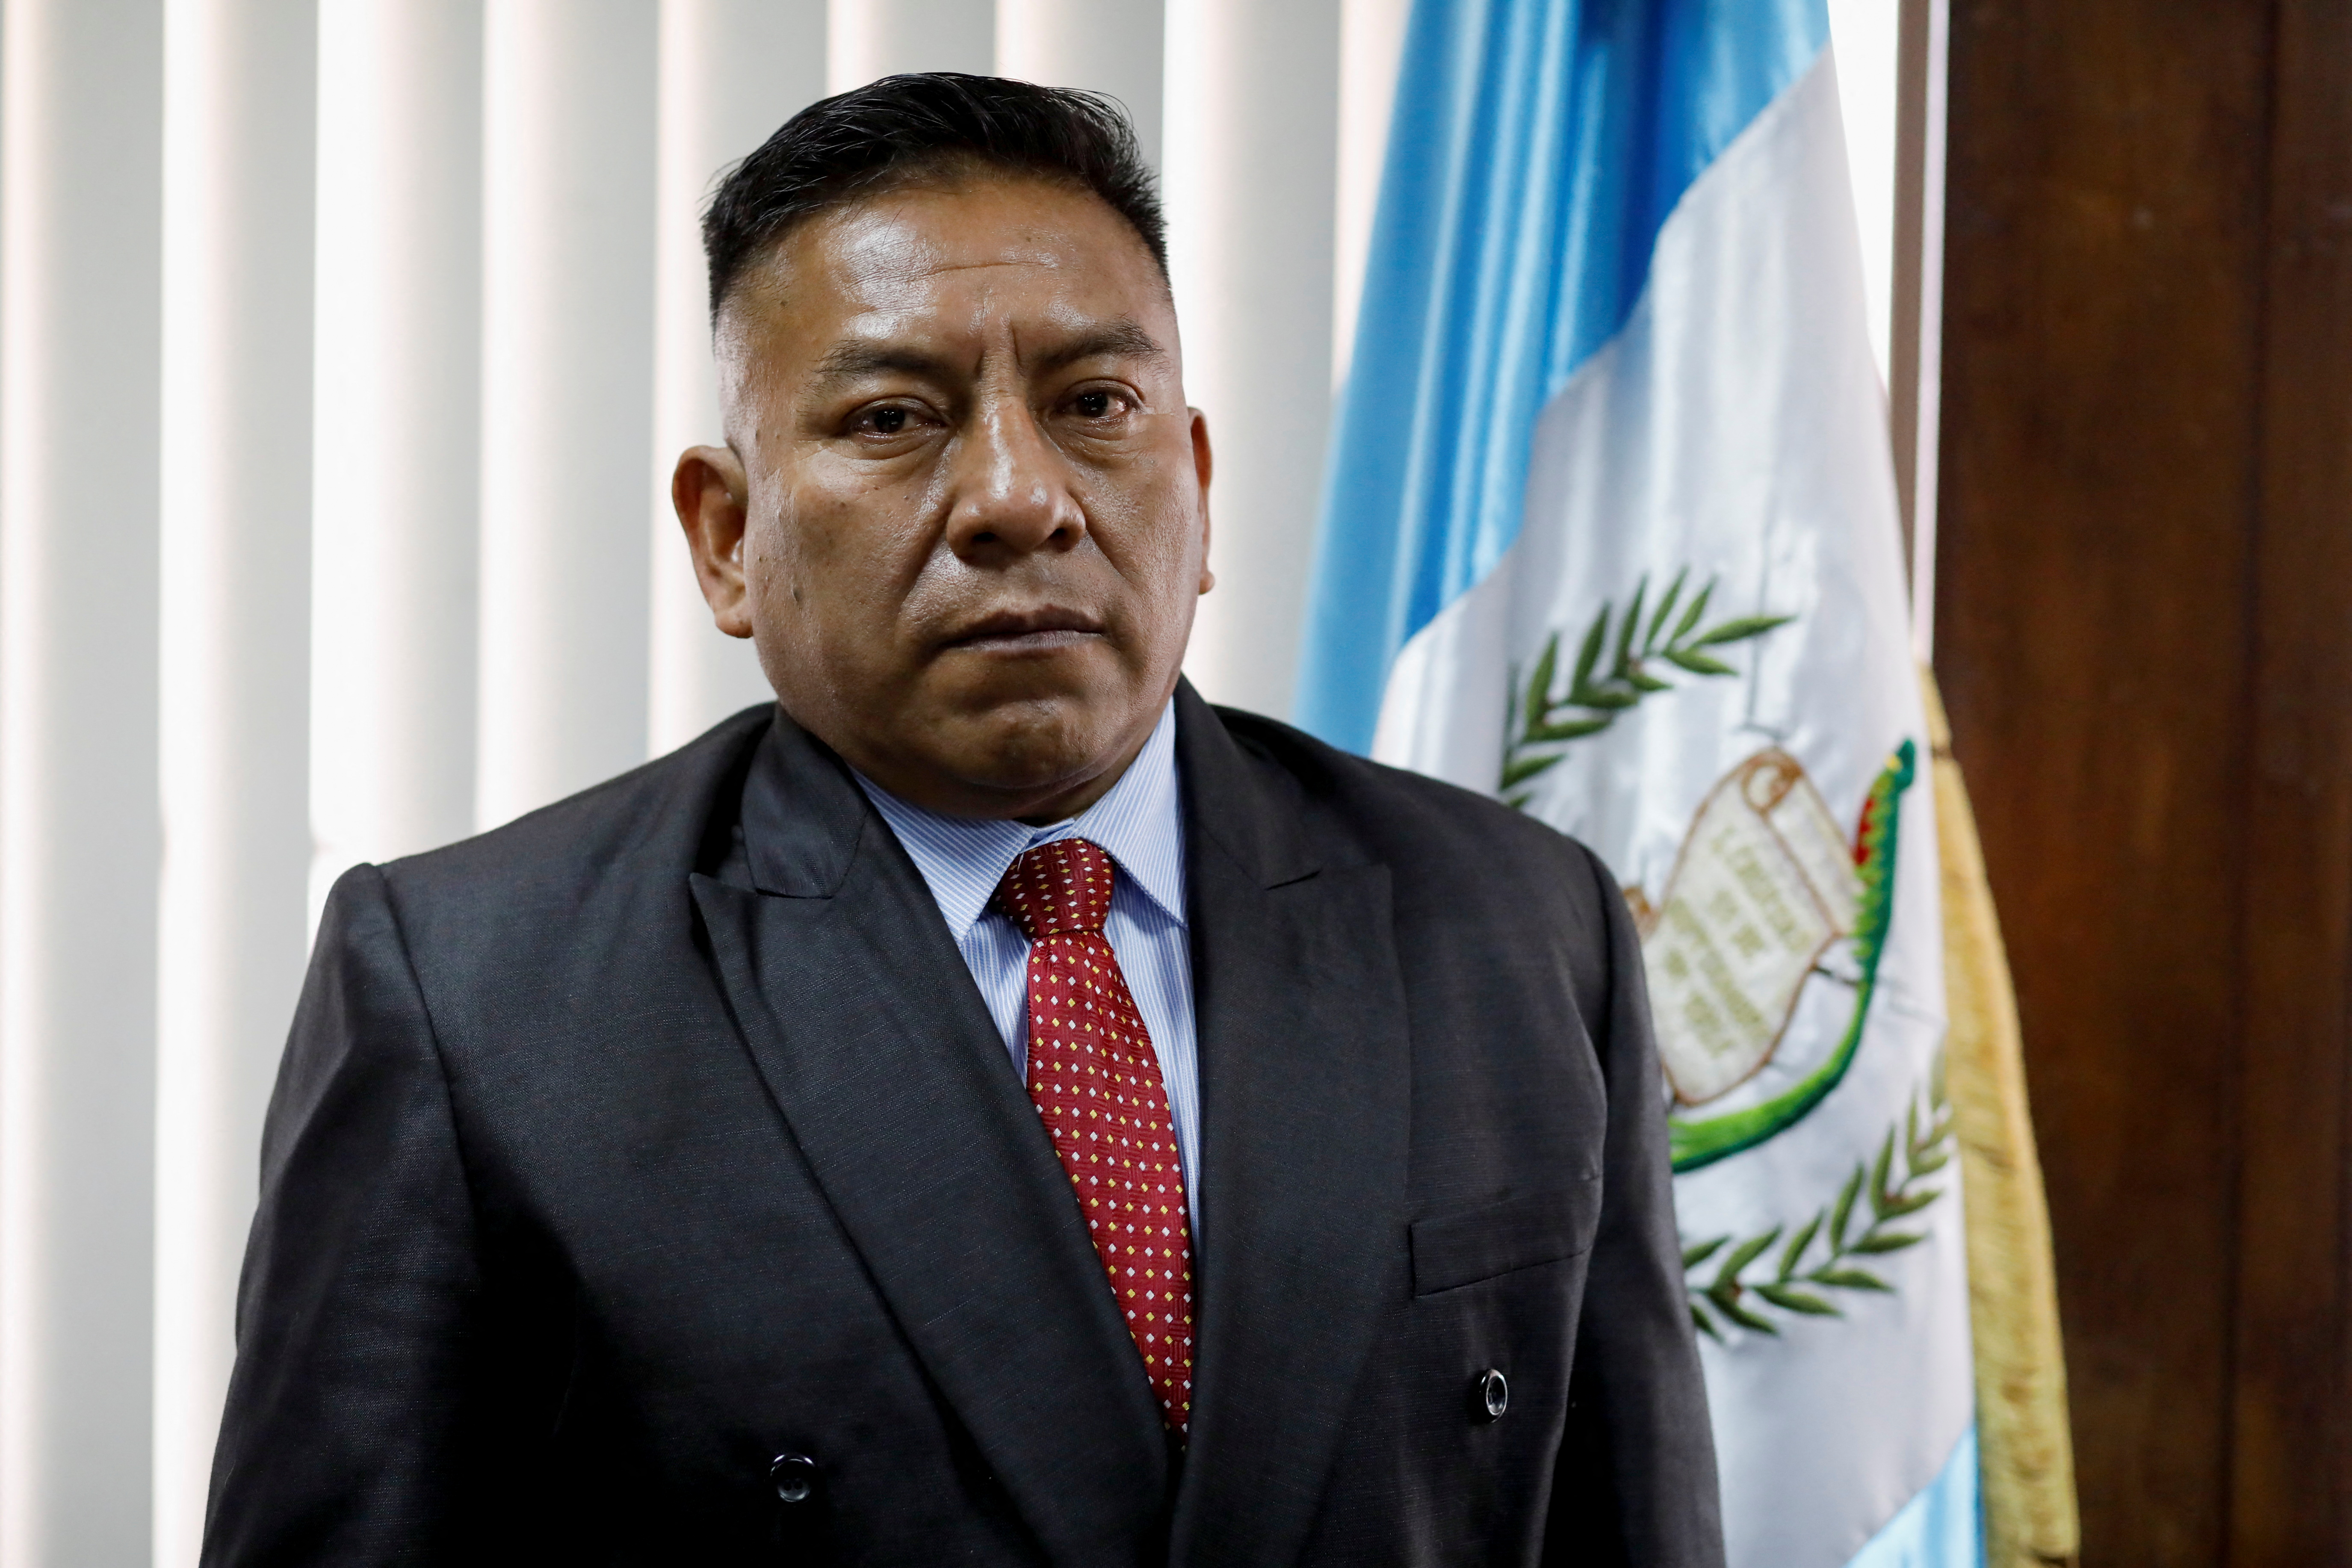 Judge Pablo Xitumul poses for a photo at his office in Guatemala City